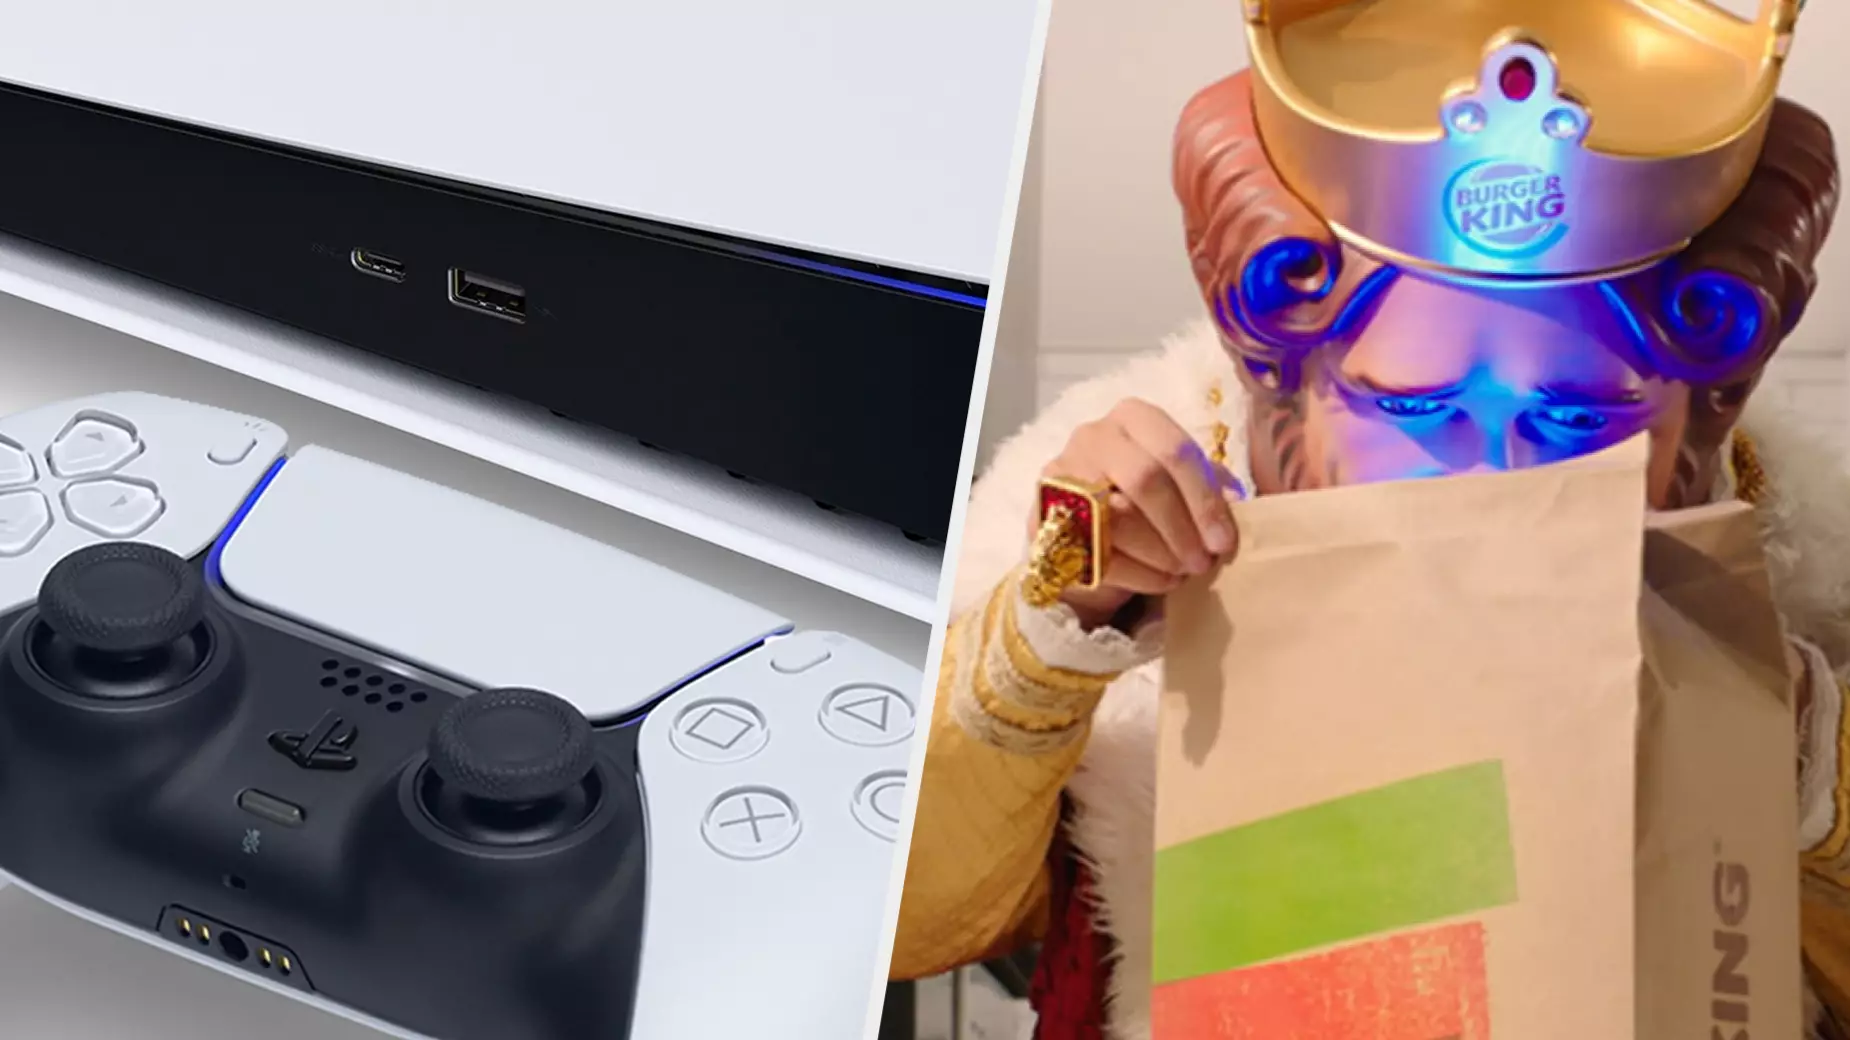 Burger King Is Giving Away Free PlayStation 5 Consoles For A Limited Time